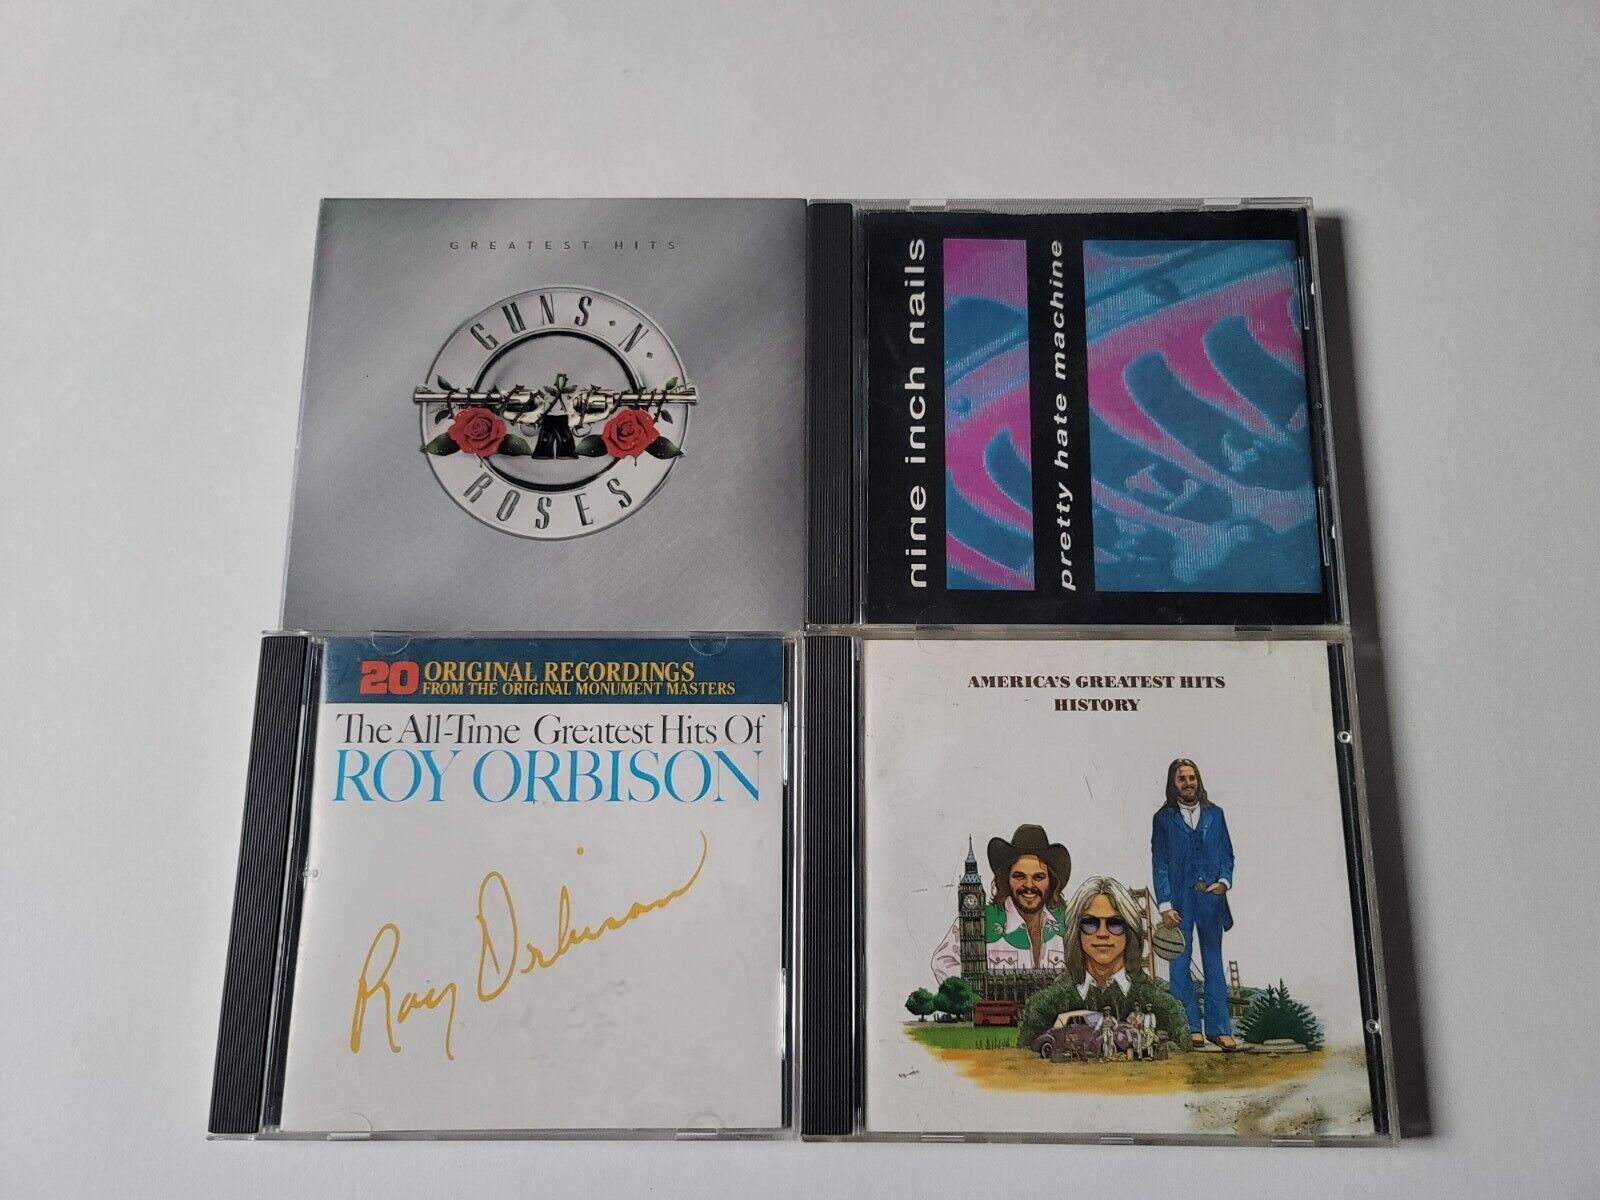 Rock CD Lot of 4 Guns and Roses, Nine Inch Nails, Roy Orbison, Americas Greatest